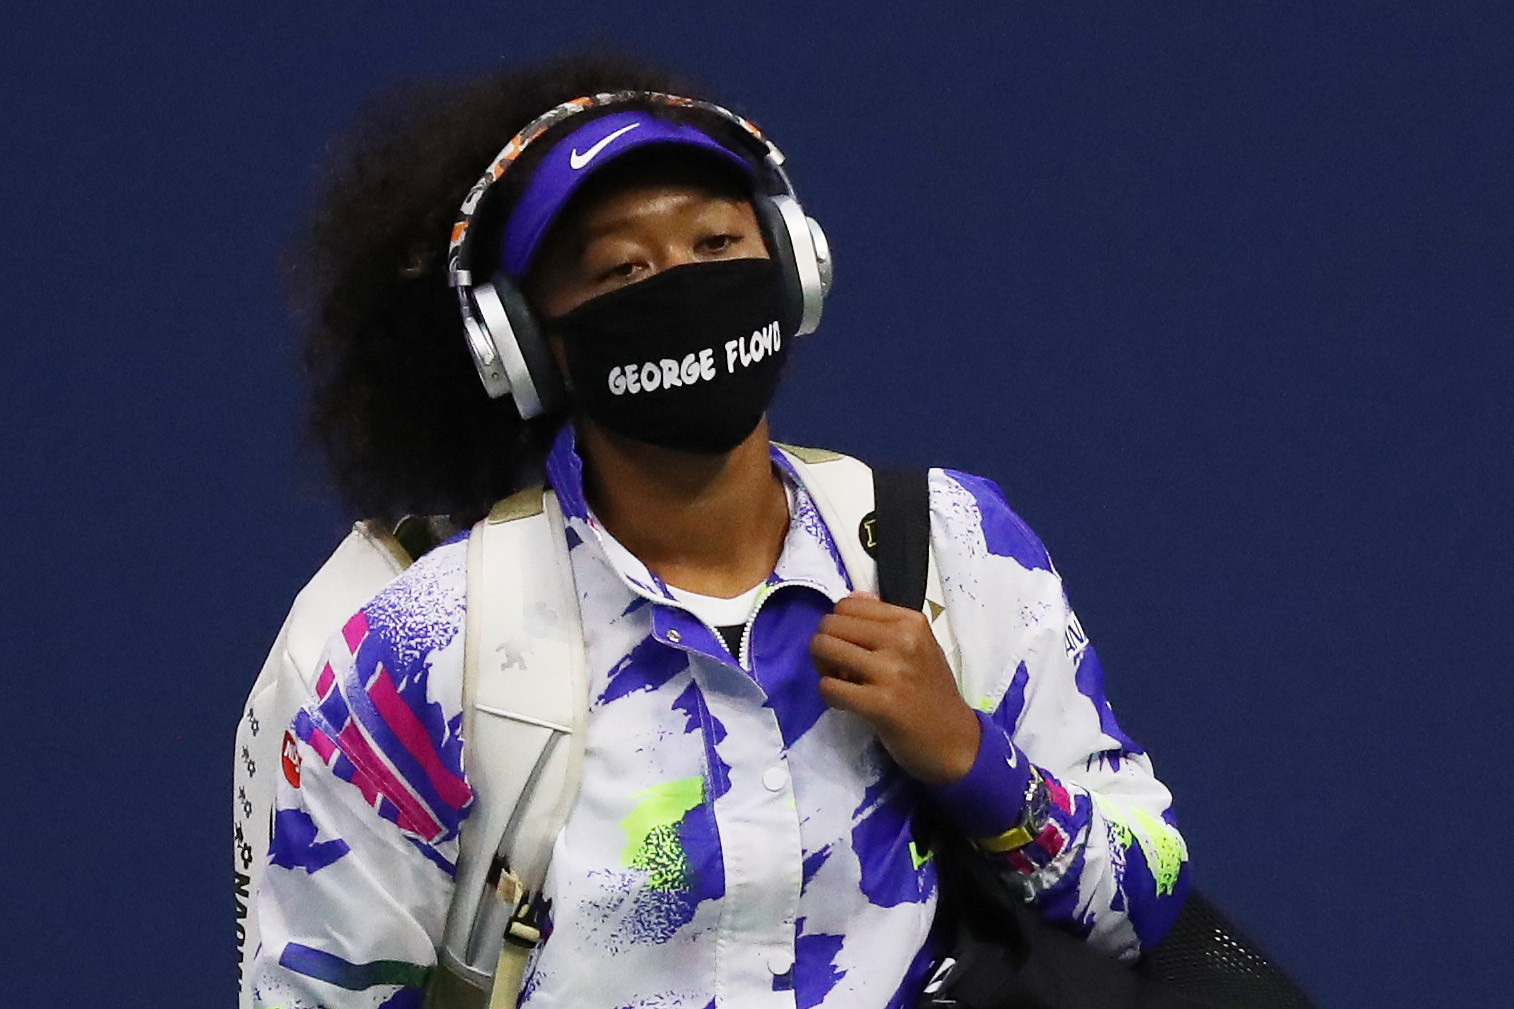 Naomi Osaka wore a facemask bearing the names of a victim of racism and police brutality in the United States before every match at last year's US Open ©Getty Images